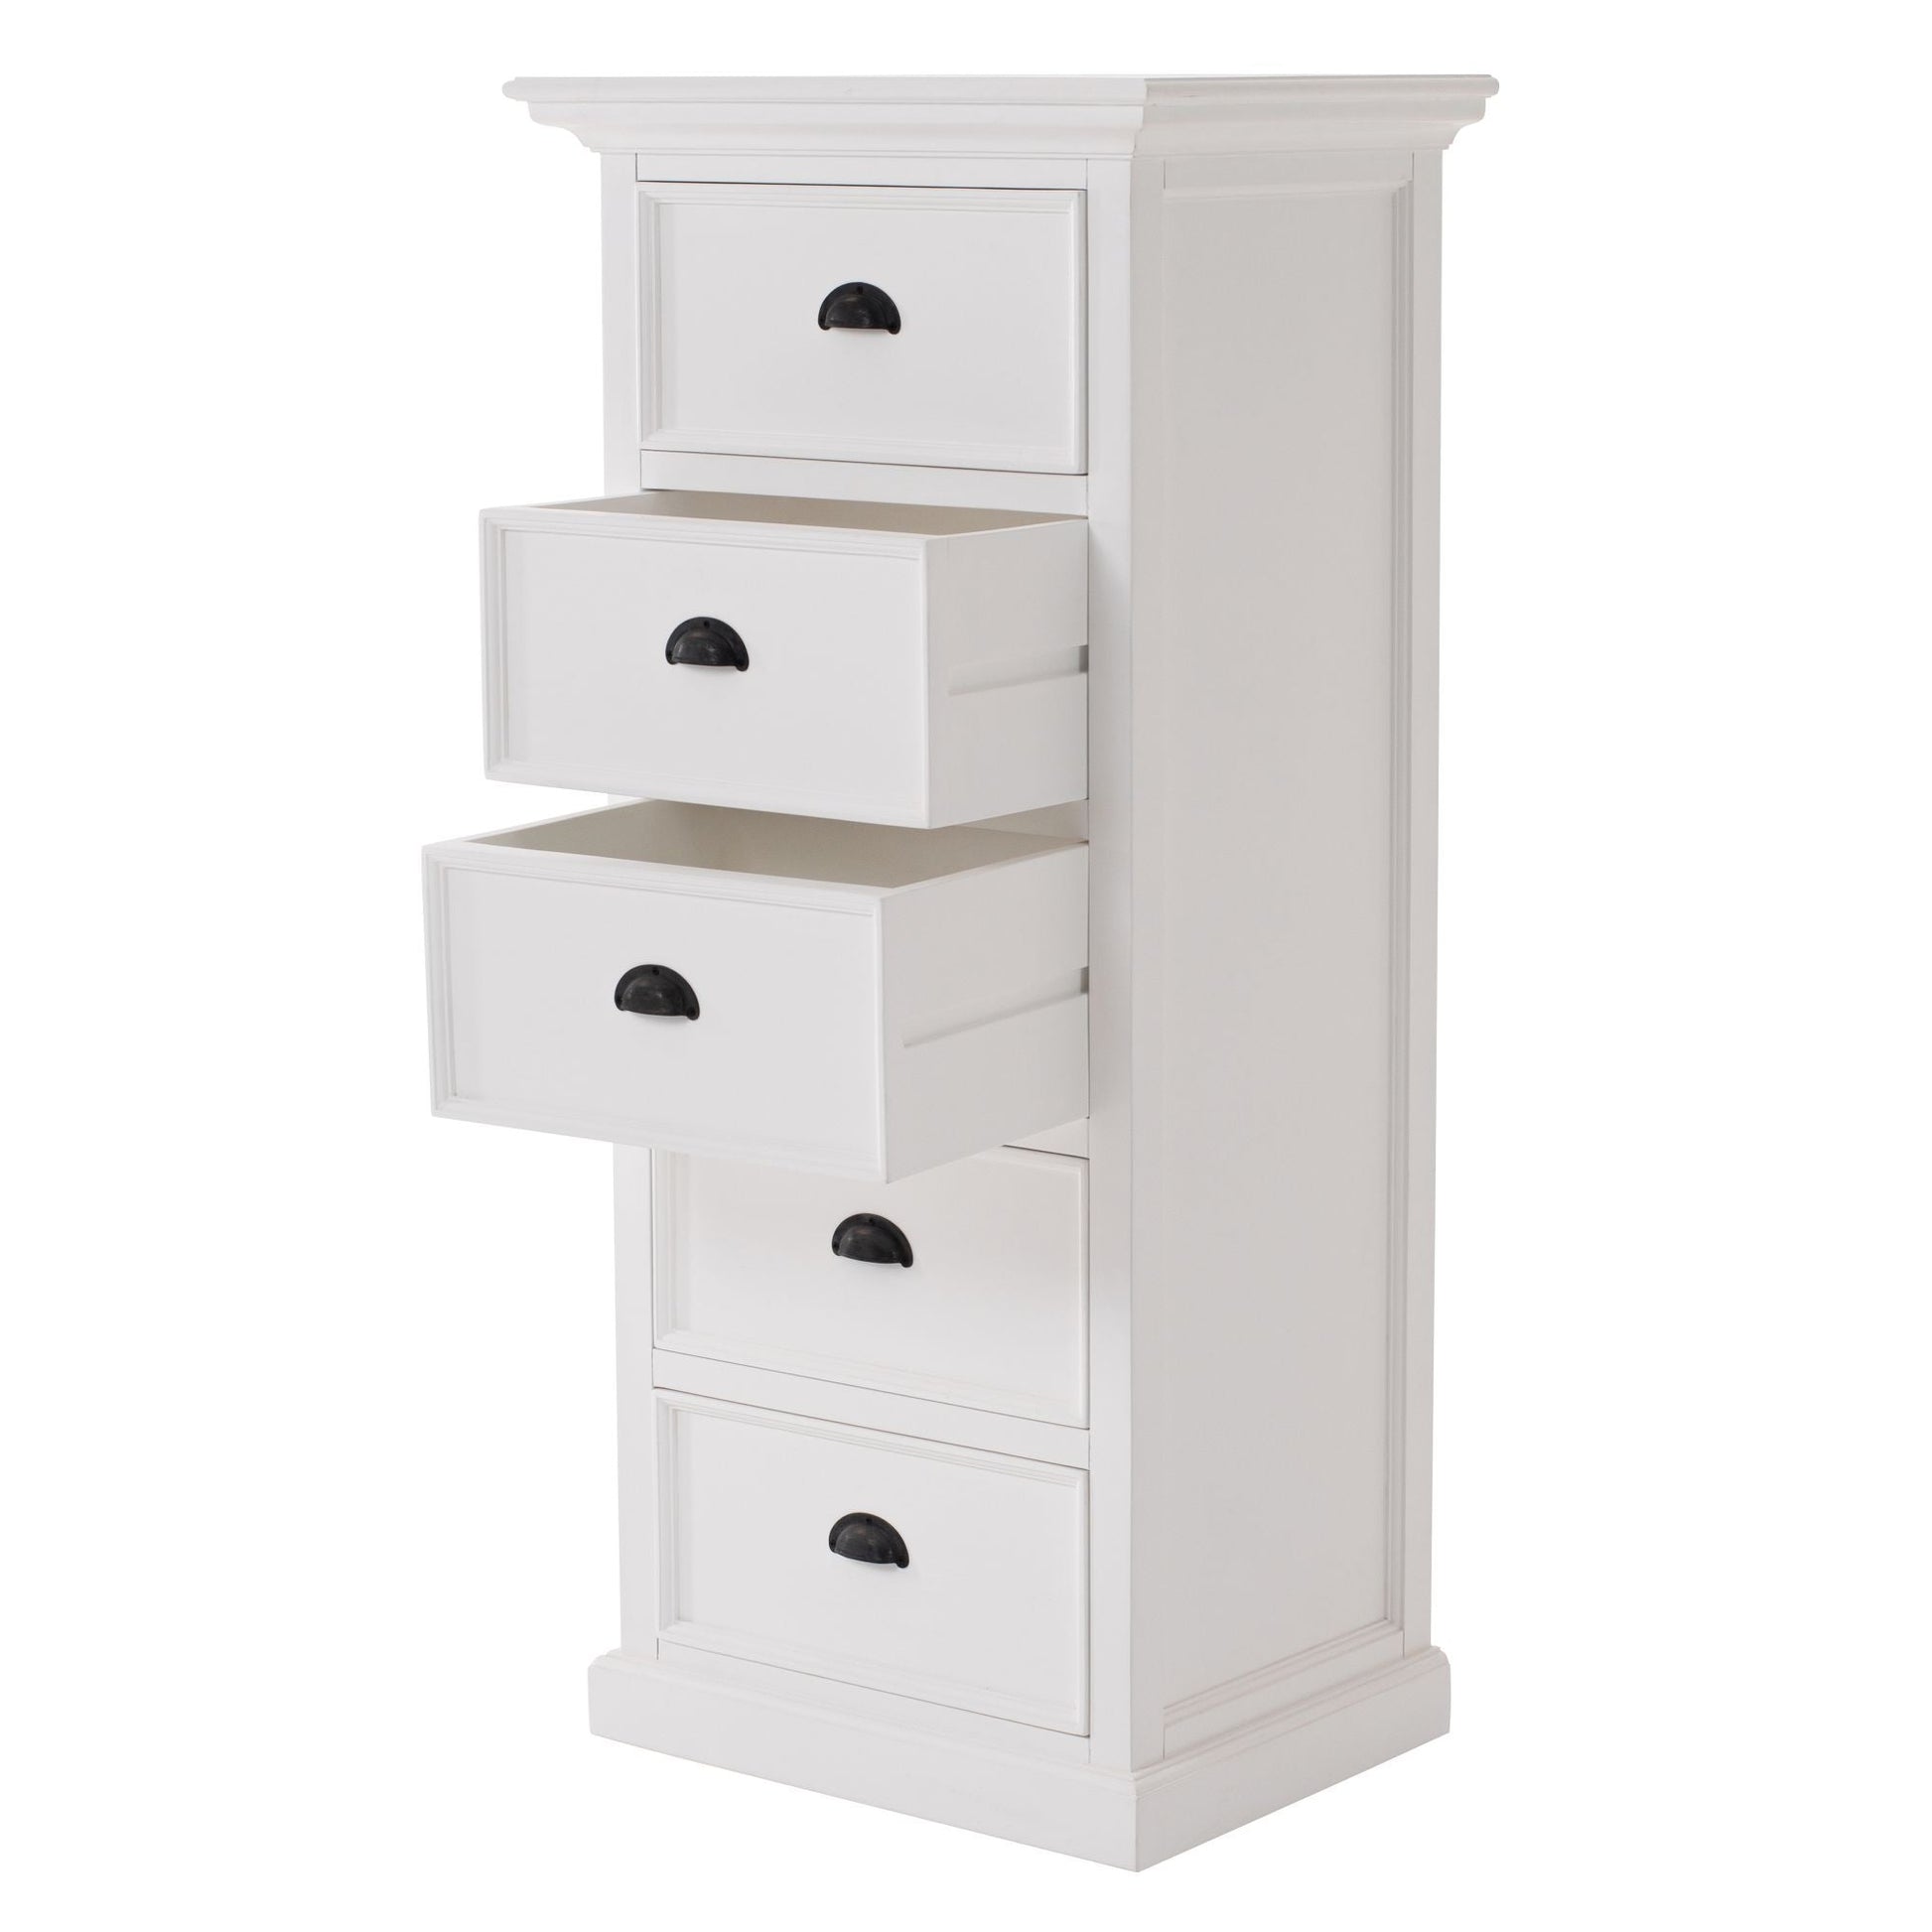 Storage Unit with Drawers, White